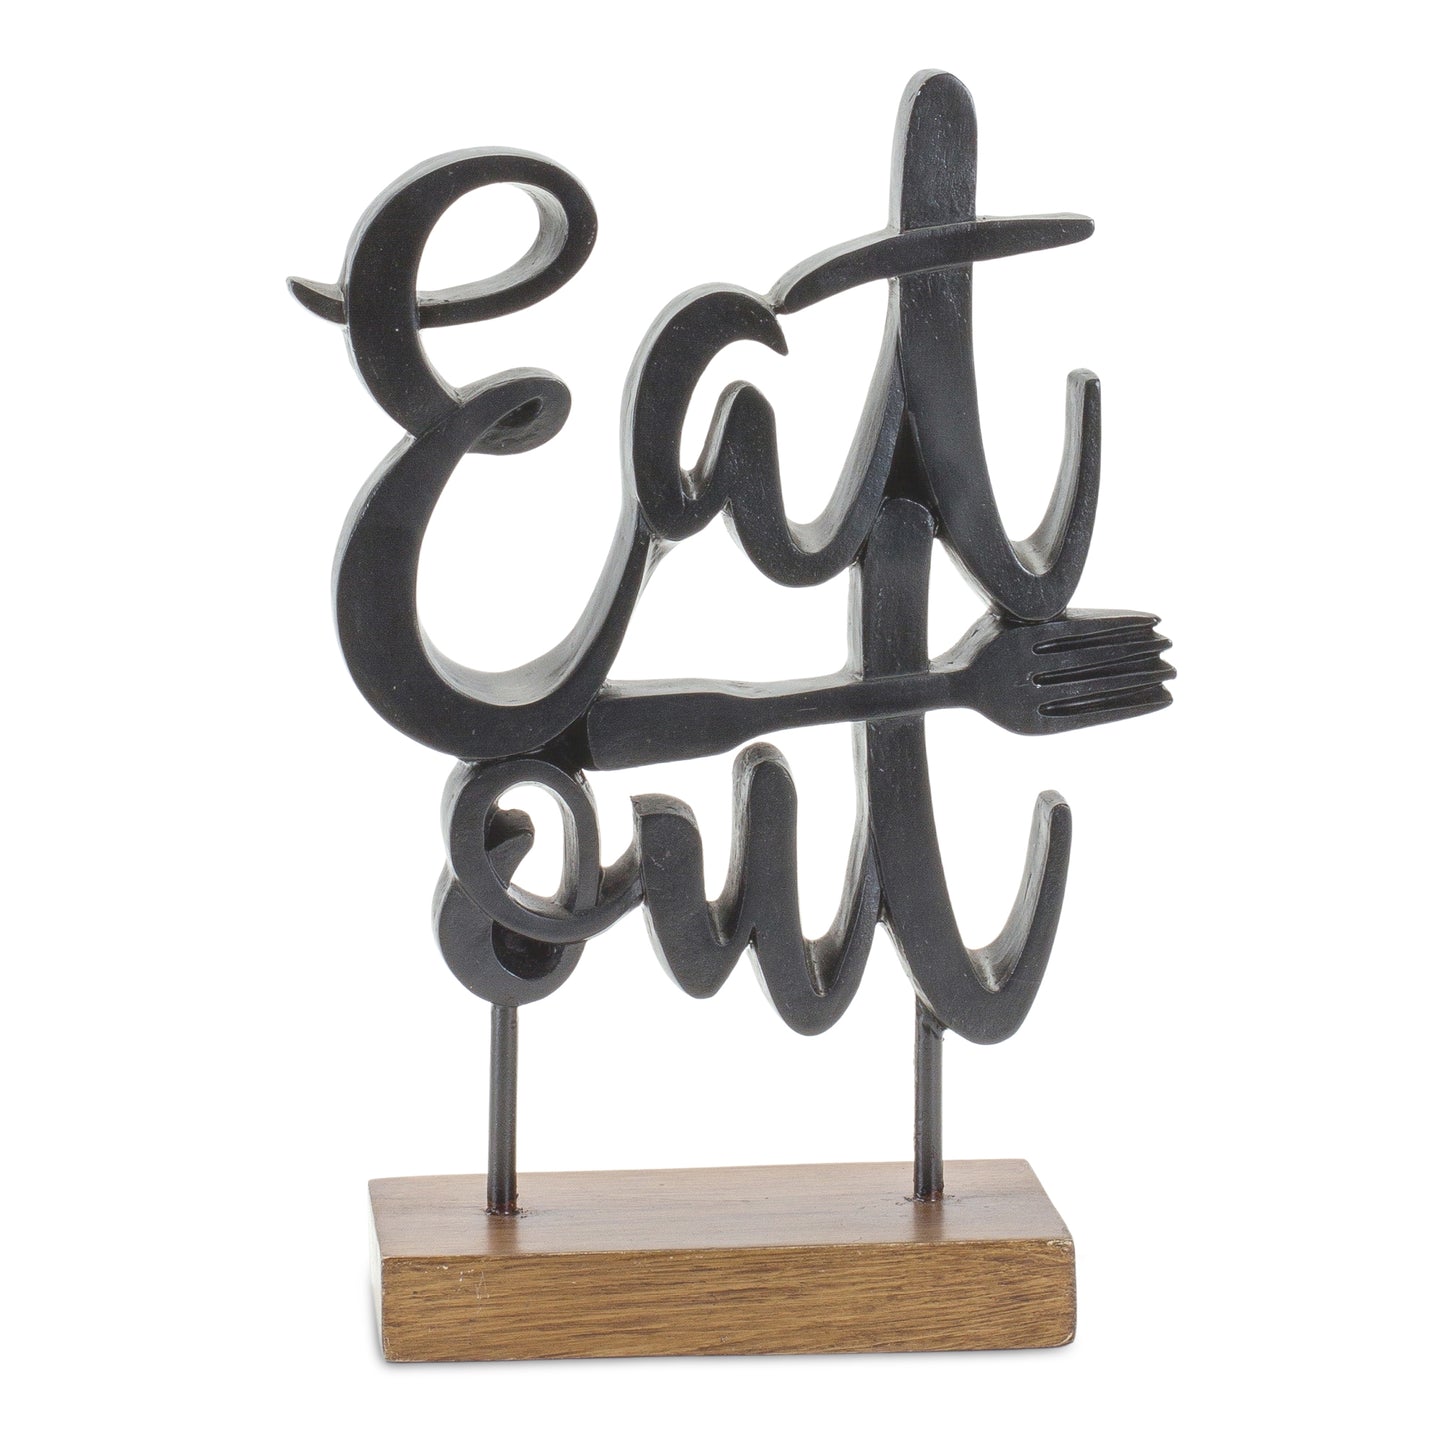 Eat Out Kitchen Sentiment Sign with Wood Base 8.75"H